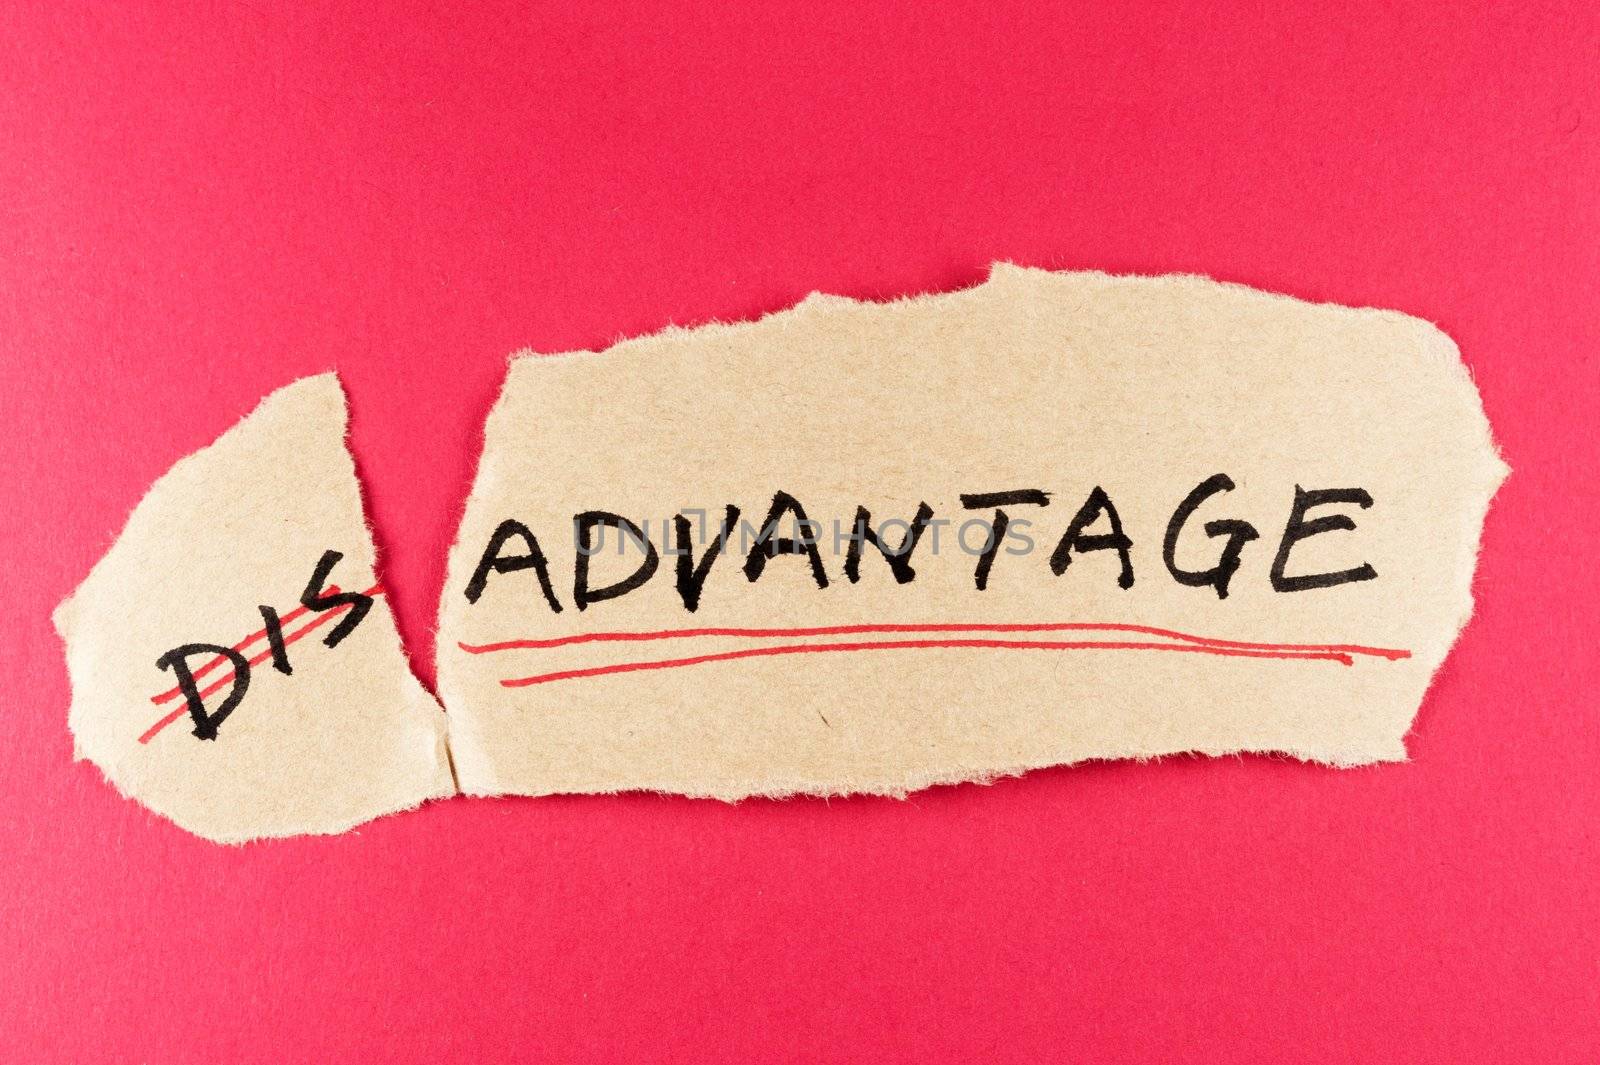 amending disadvantage word and changing it  to advantage